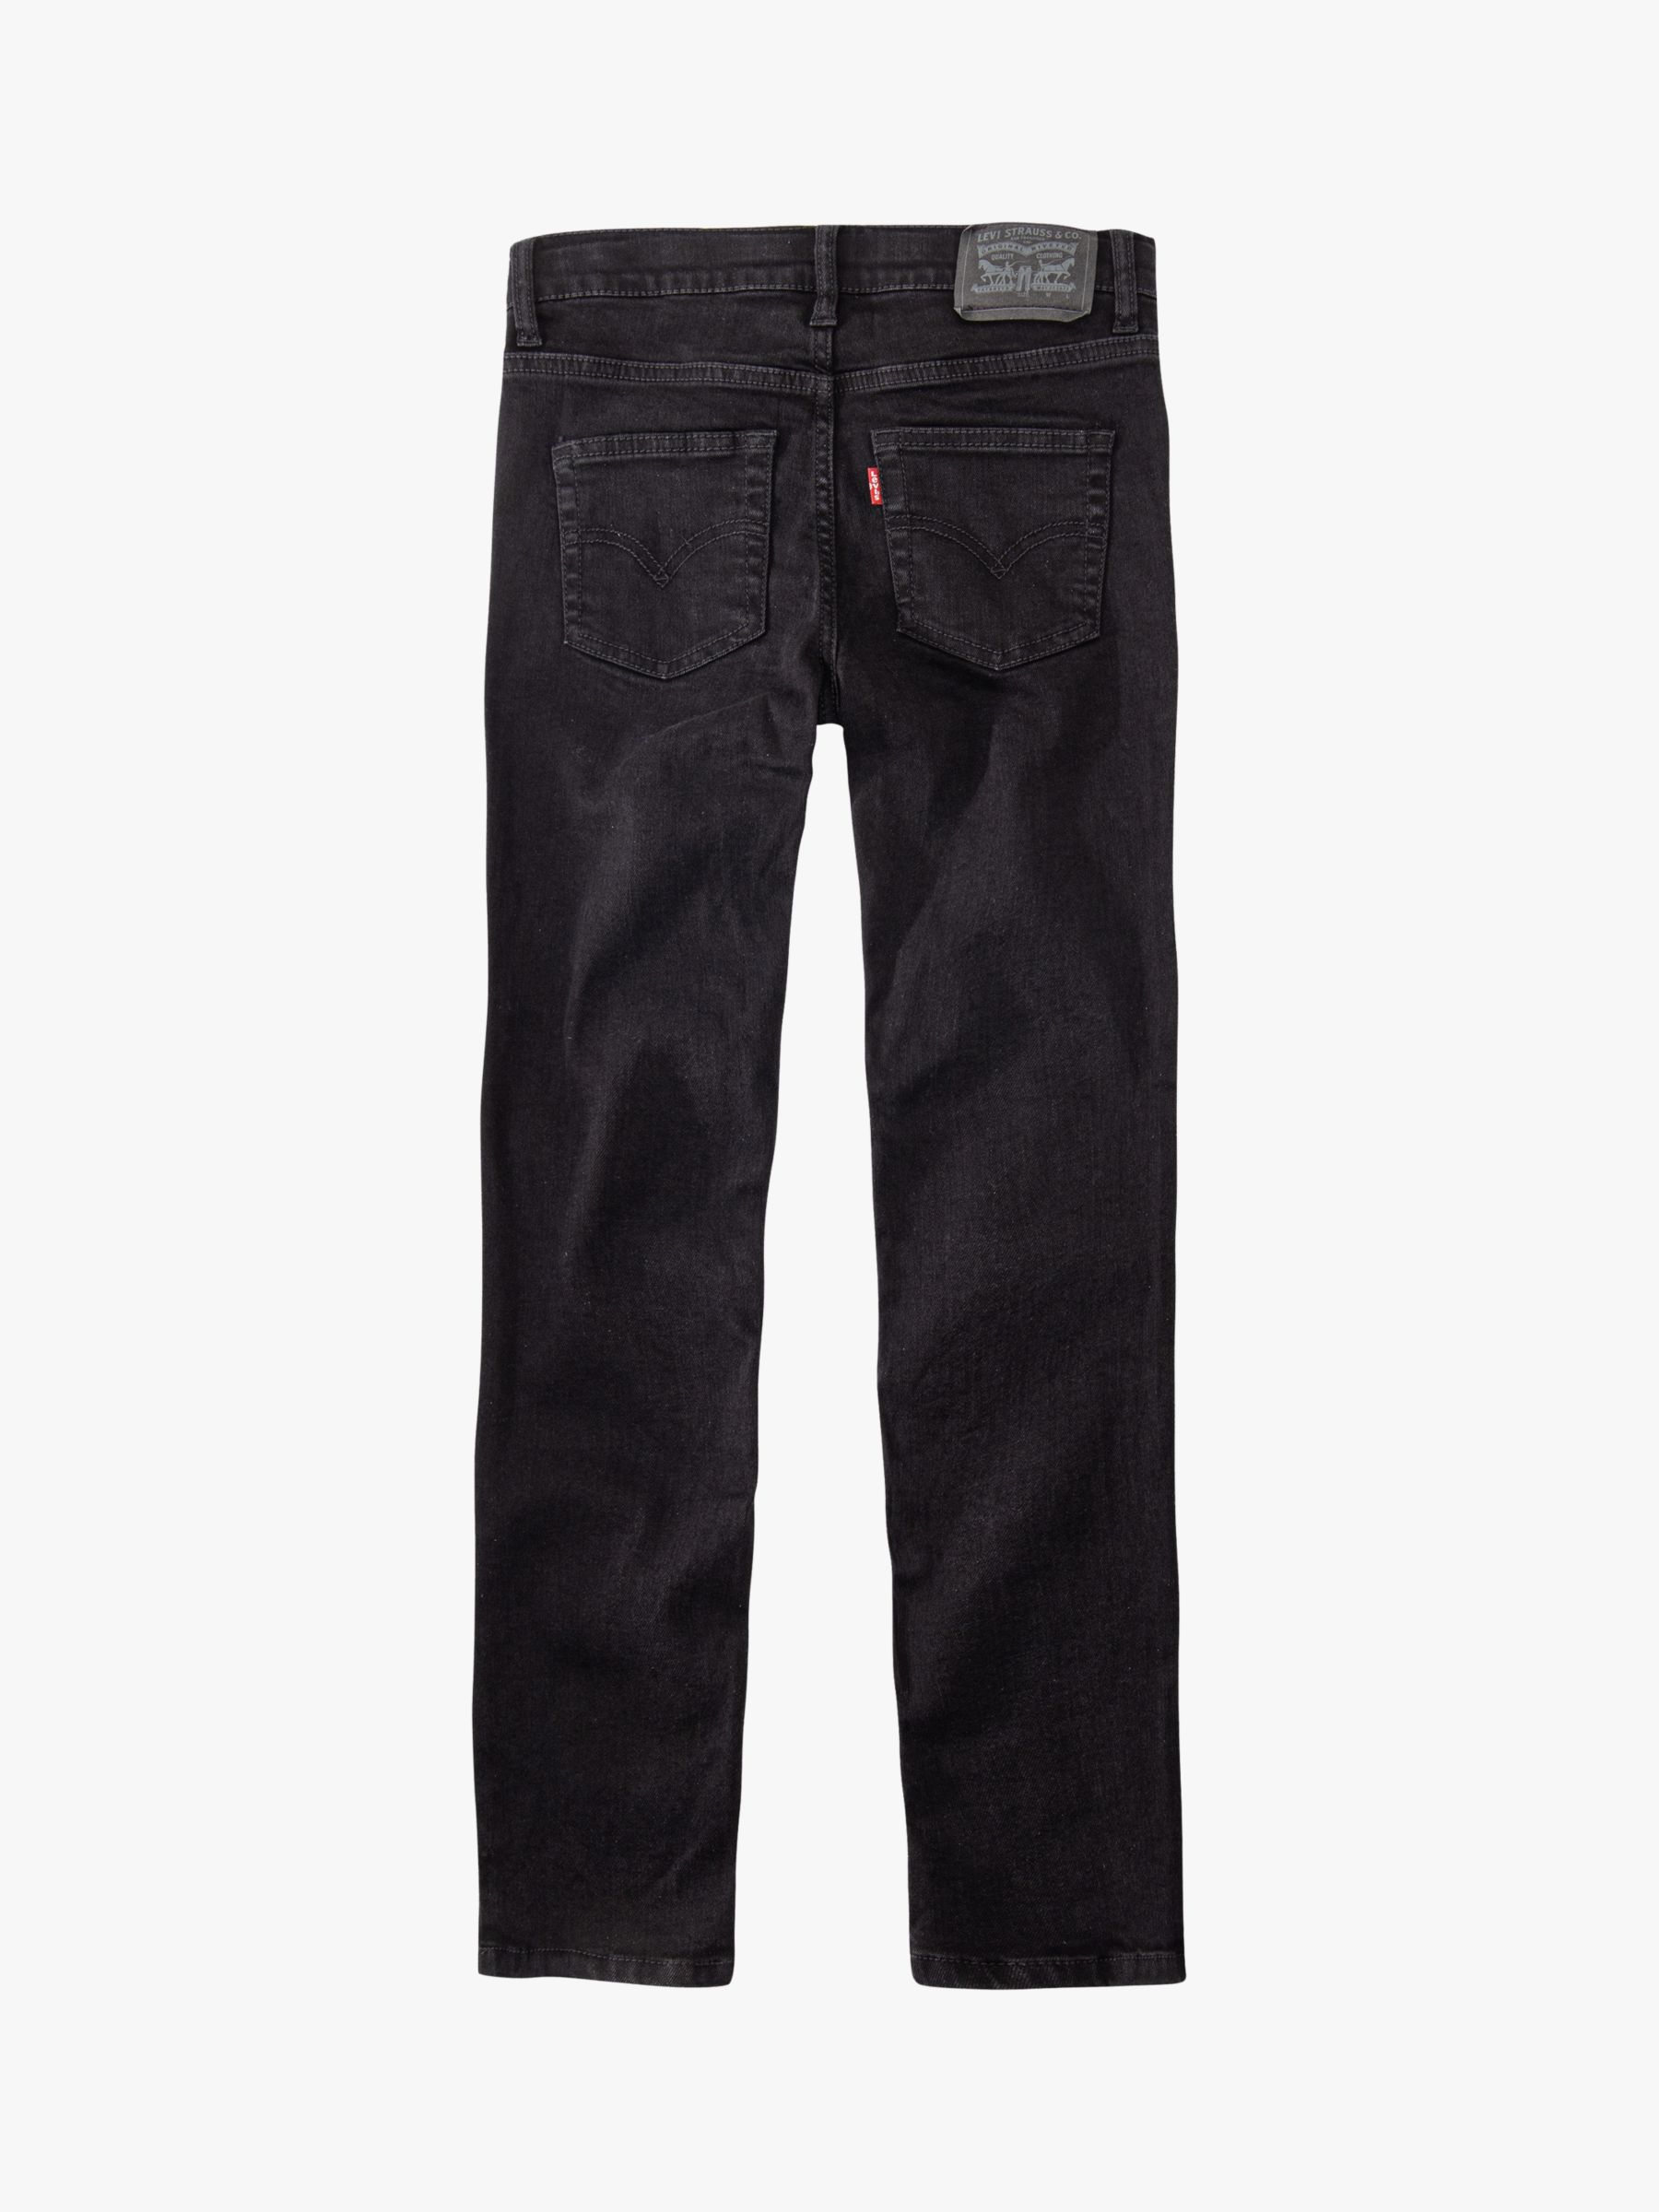 levis 519 cleaner